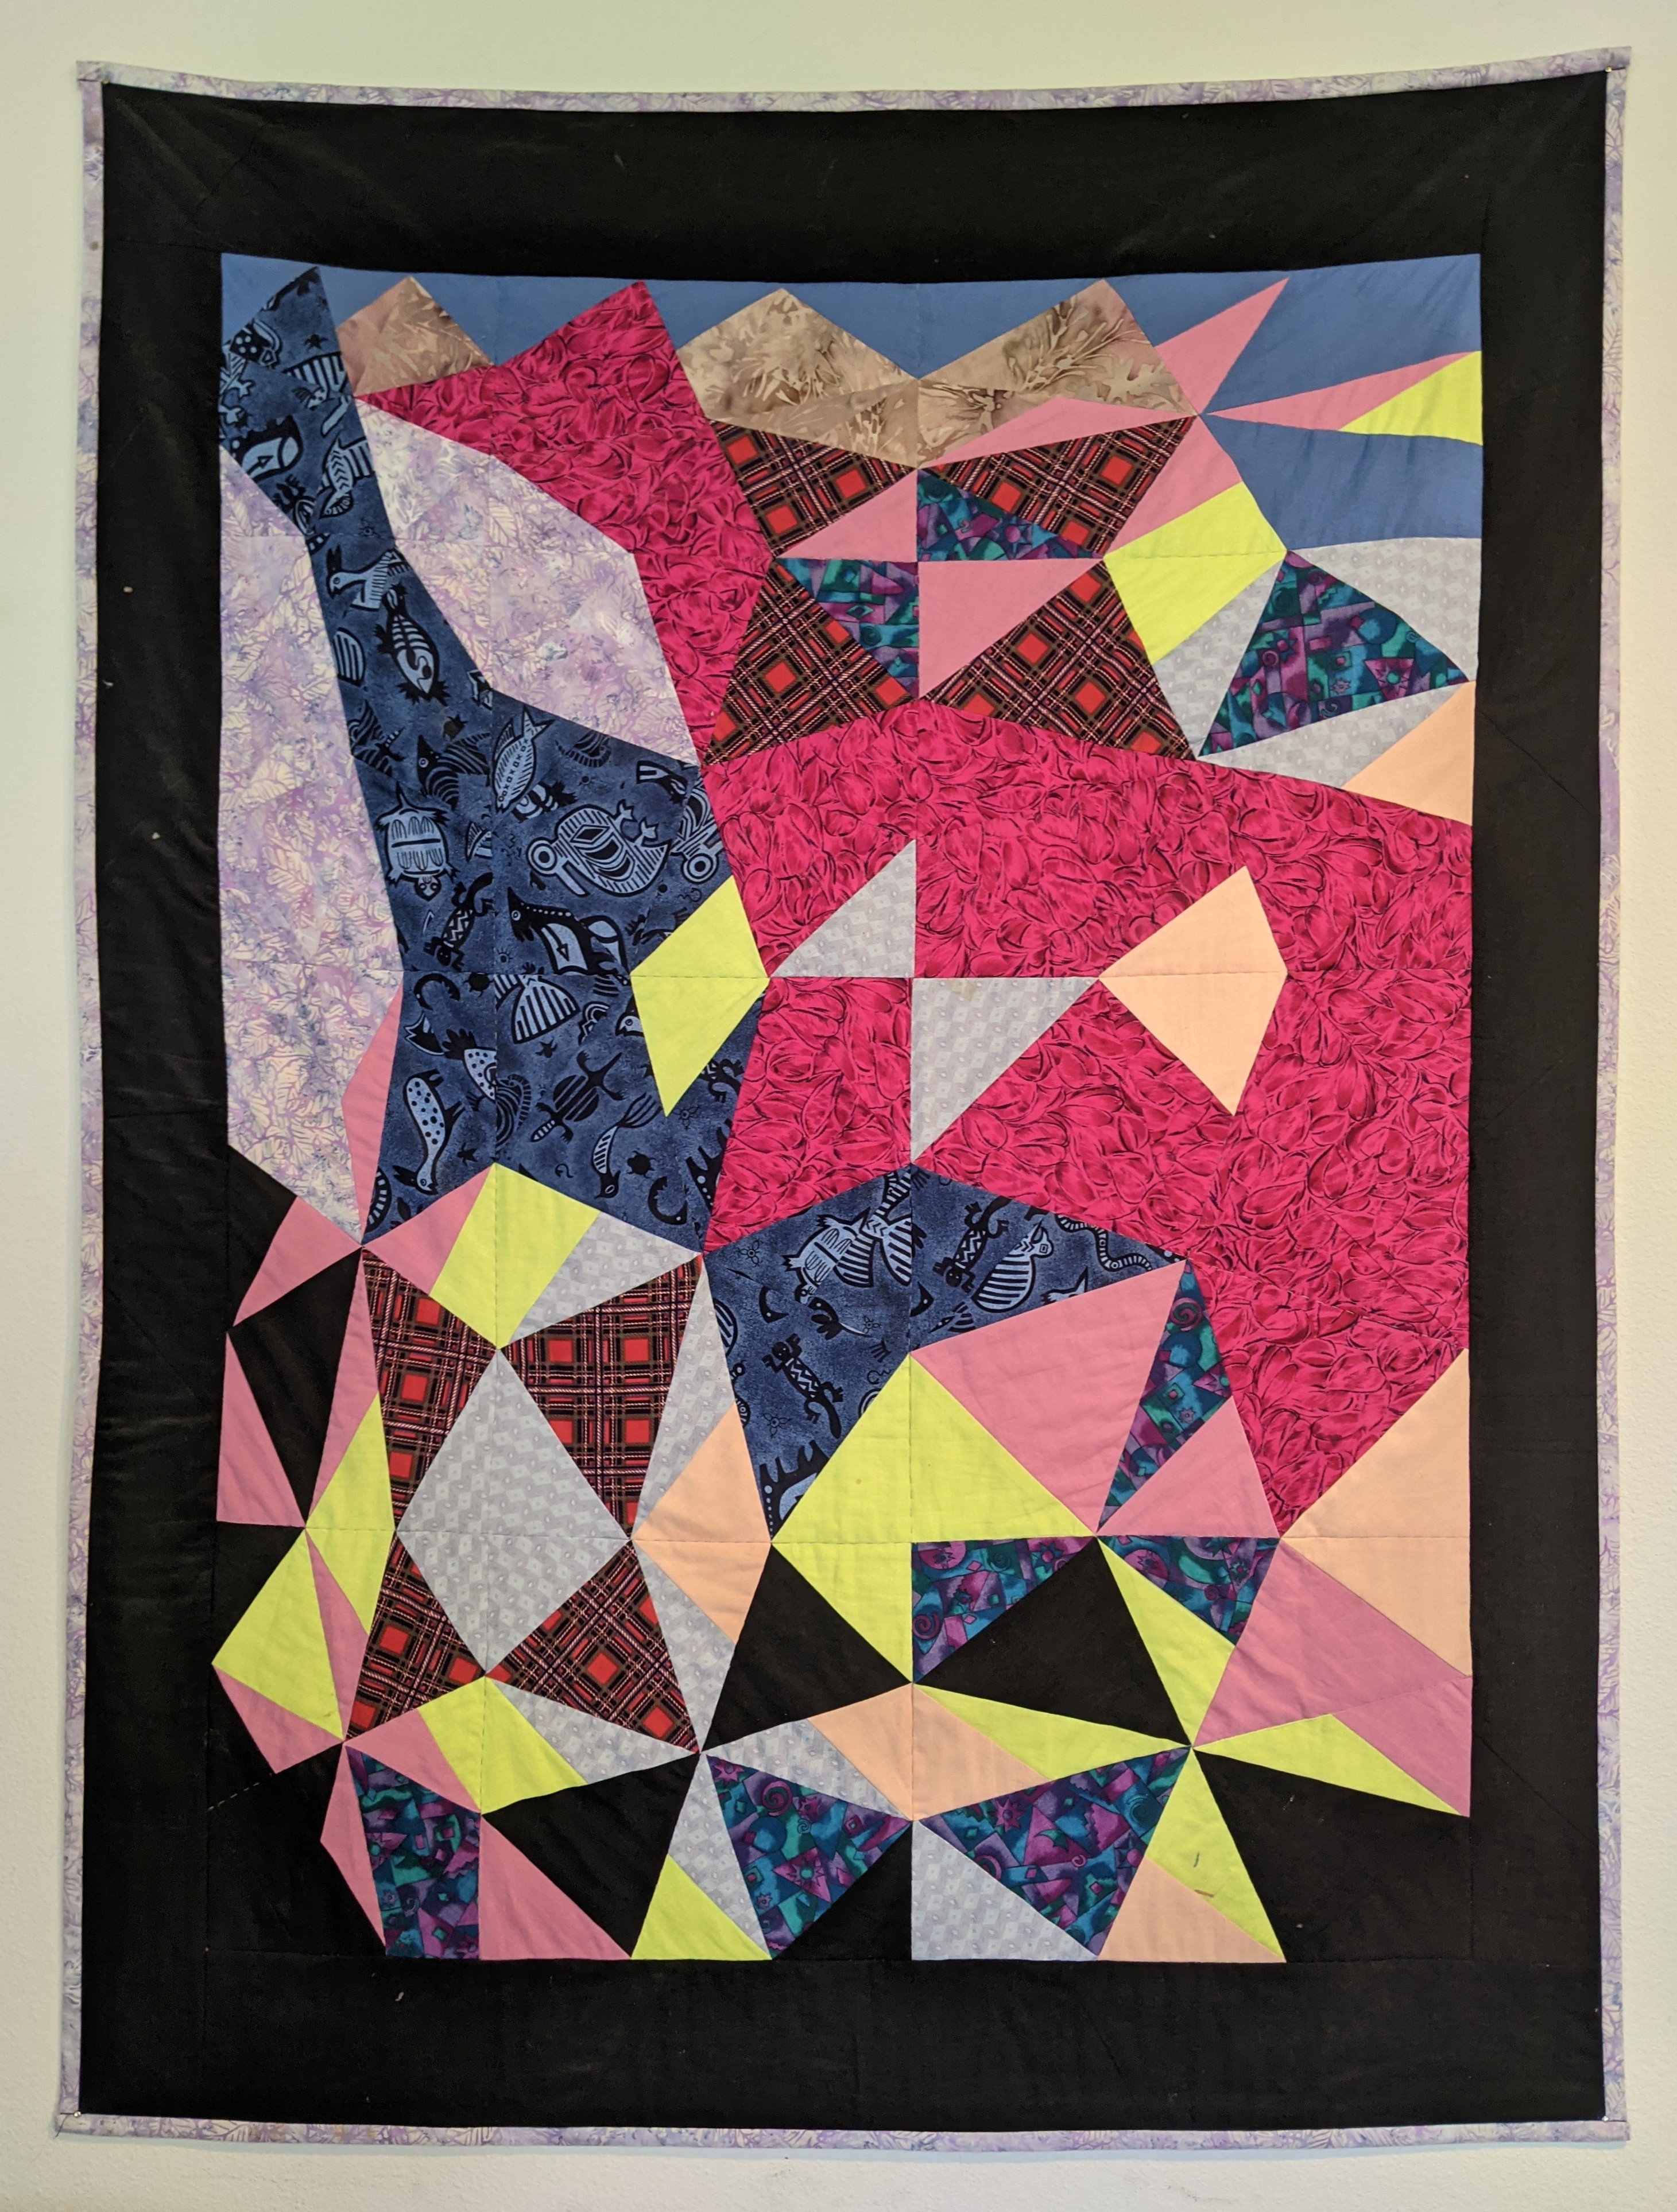 You see an abstract pink animal from above. There are brightly colored triangles flying all around. Below is the animal's shadow. It is a quilt hanging on the wall.